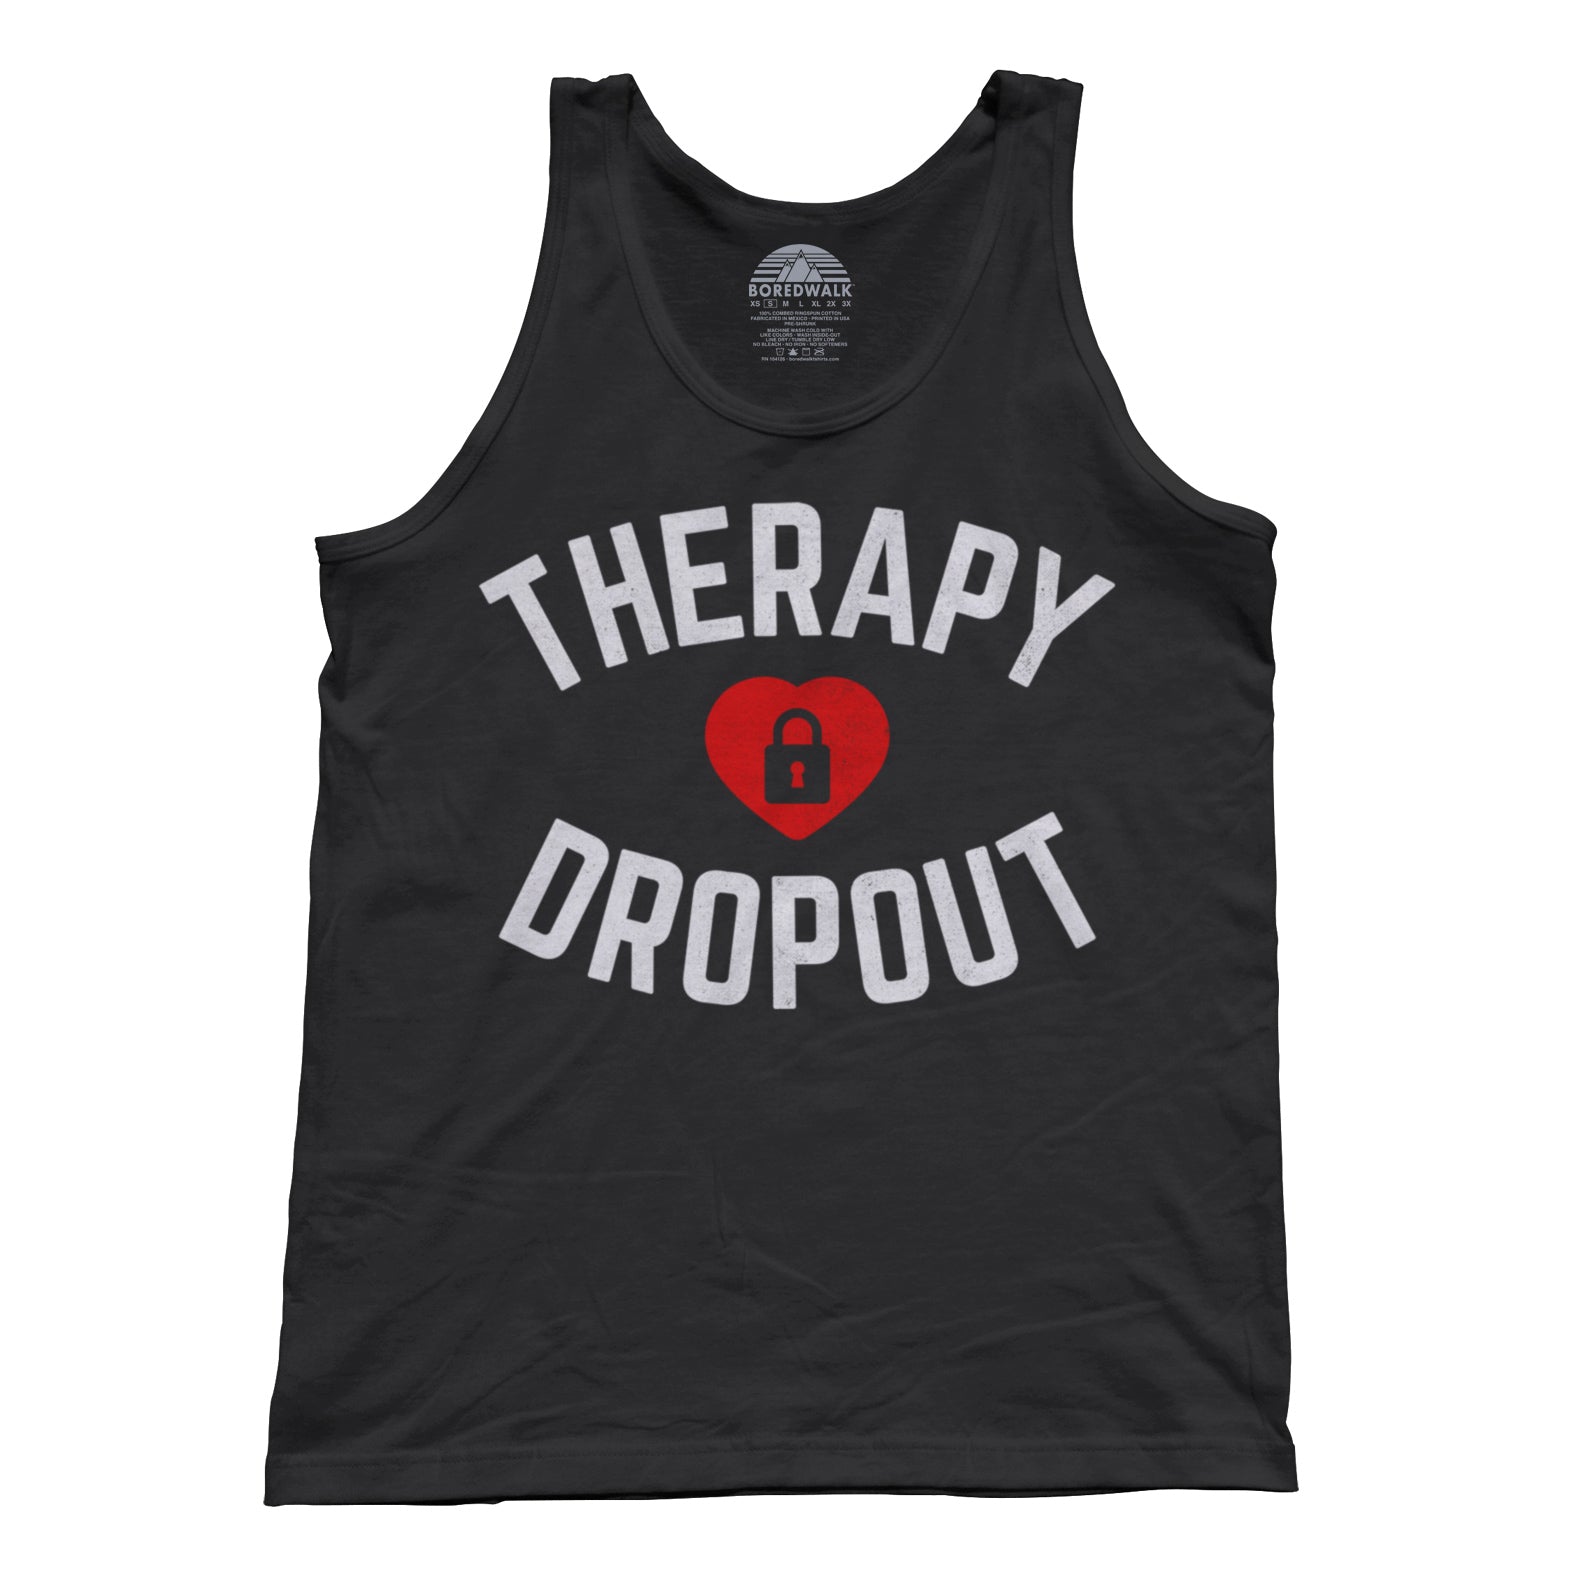 Unisex Therapy Dropout Tank Top